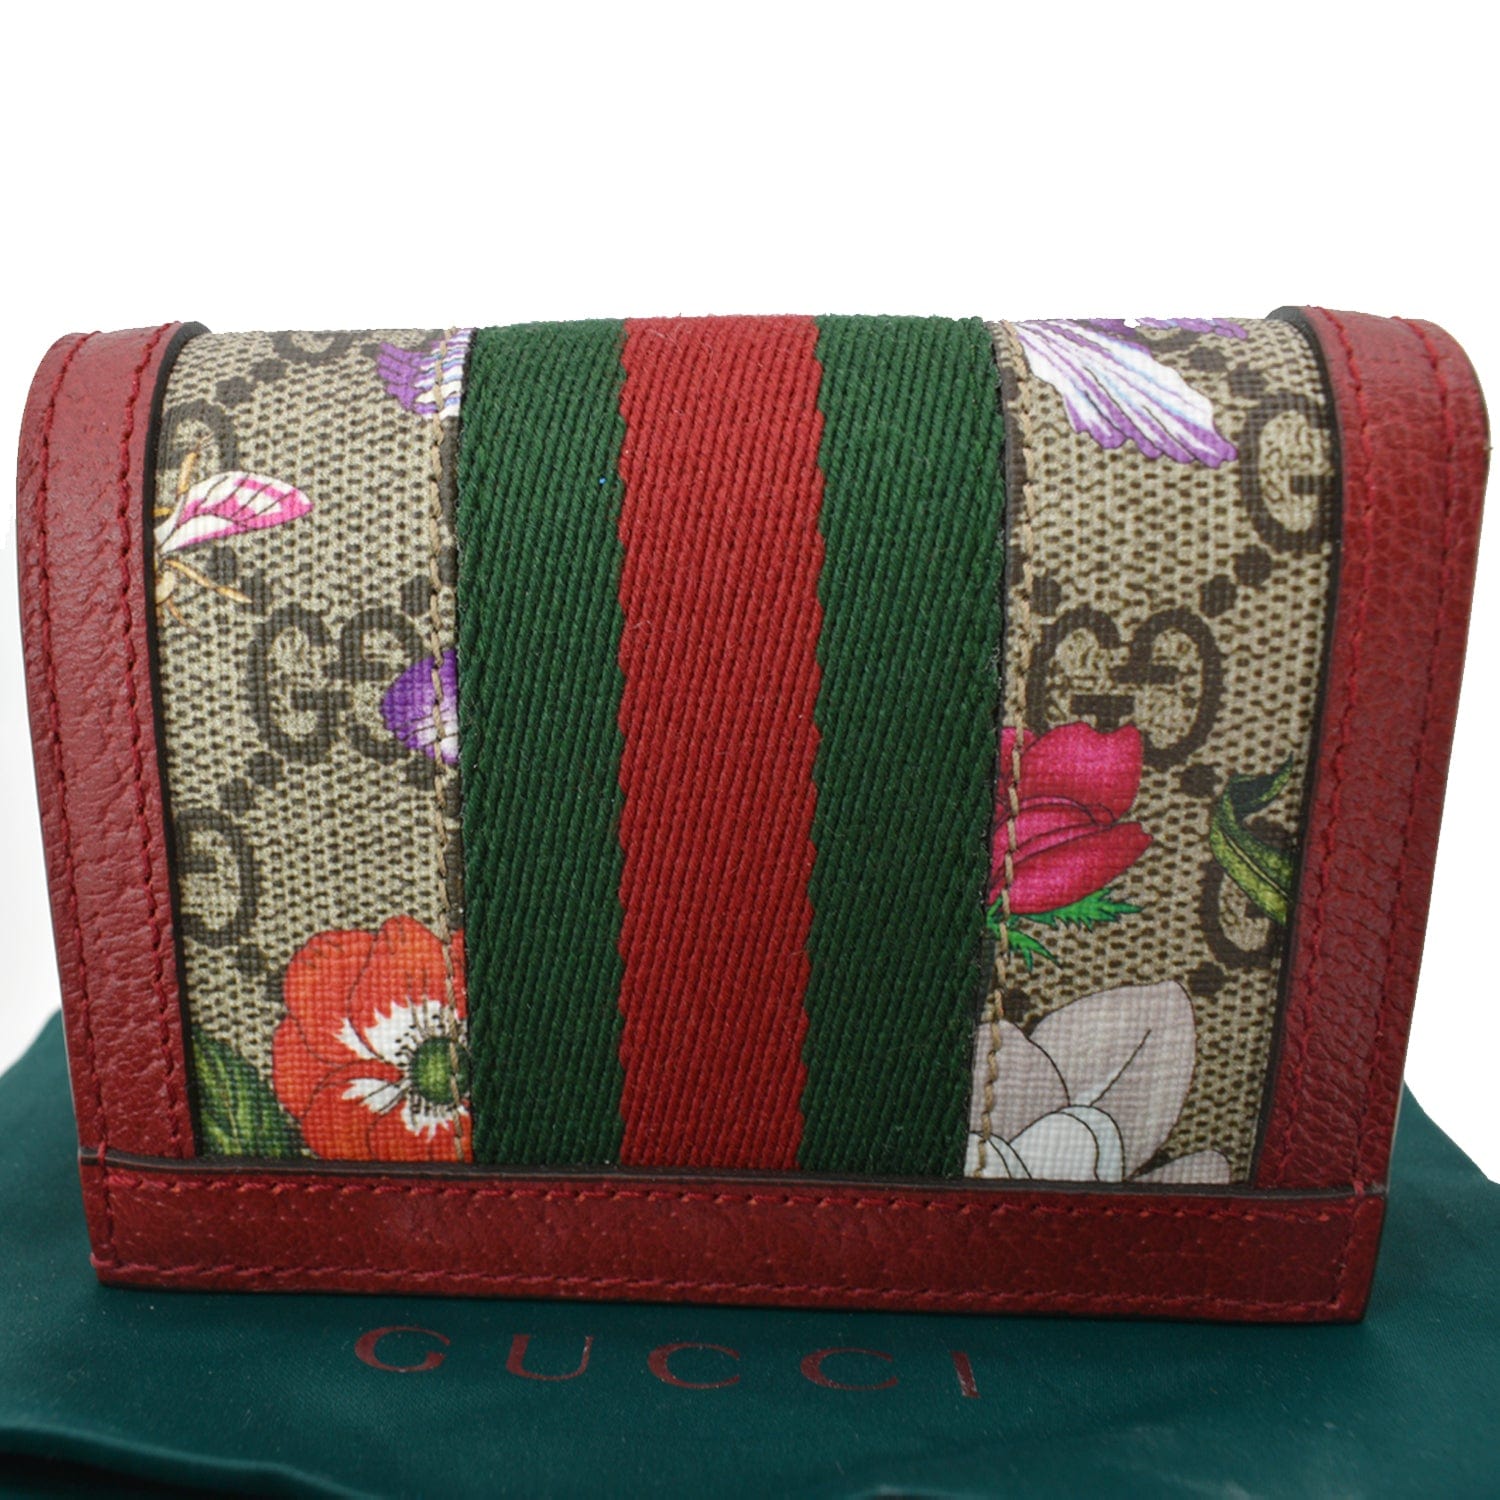 GUCCI Beauty pouch pale red / pink floral pattern cosmetic makeup bag New